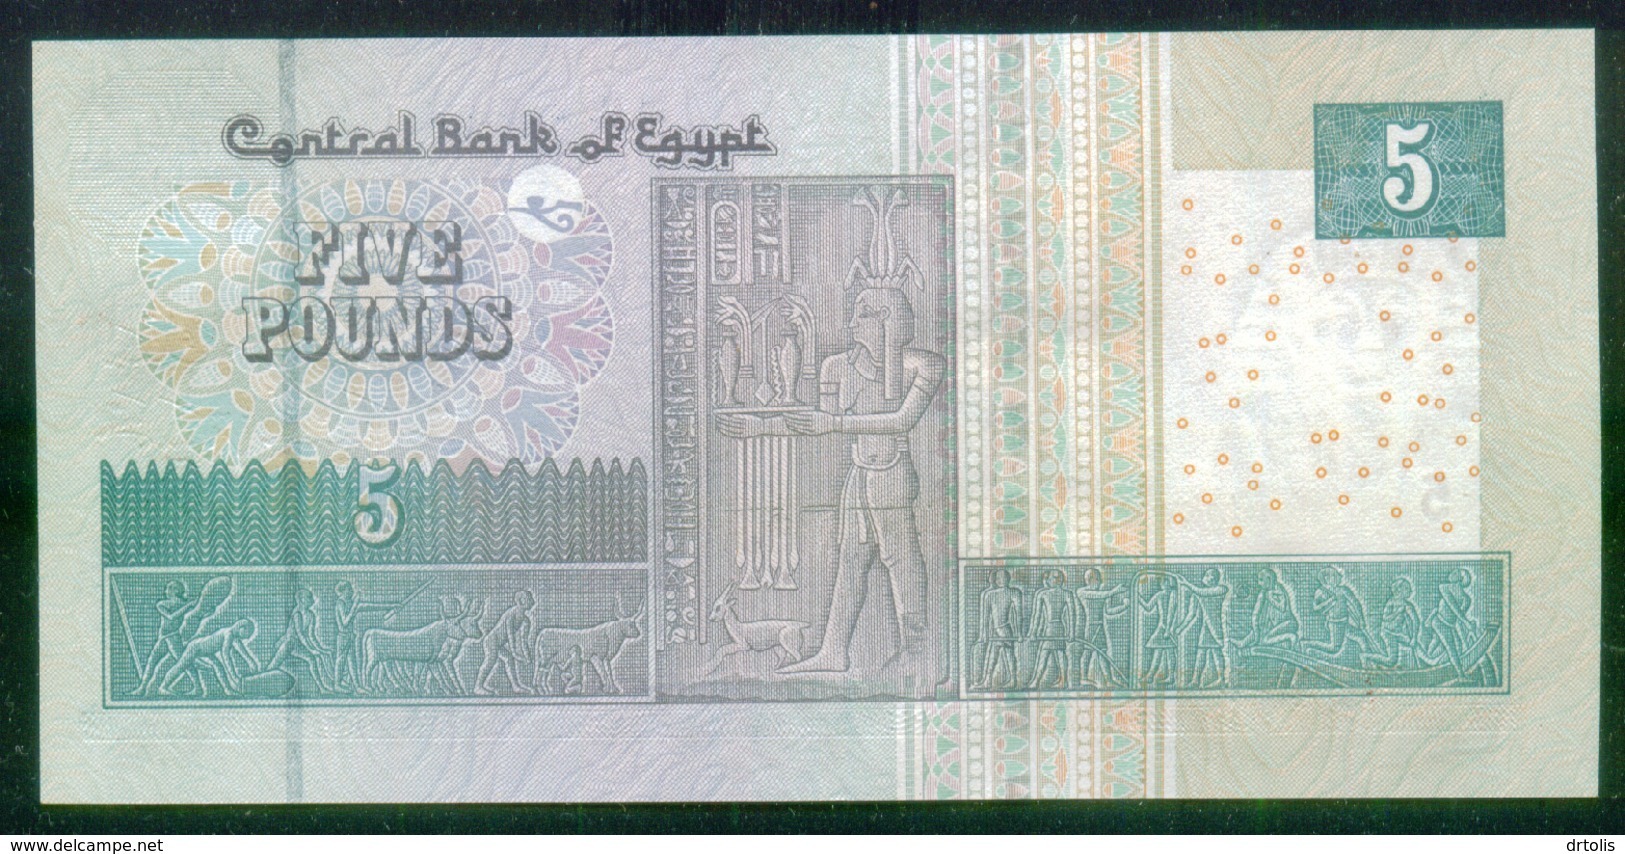 EGYPT / 5 POUNDS / REPLACEMENT NOTE / DATE : 27-12-2015 / P- 71(2) / PREFIX : 800 / SIG : AMER / UNC. - Egypte